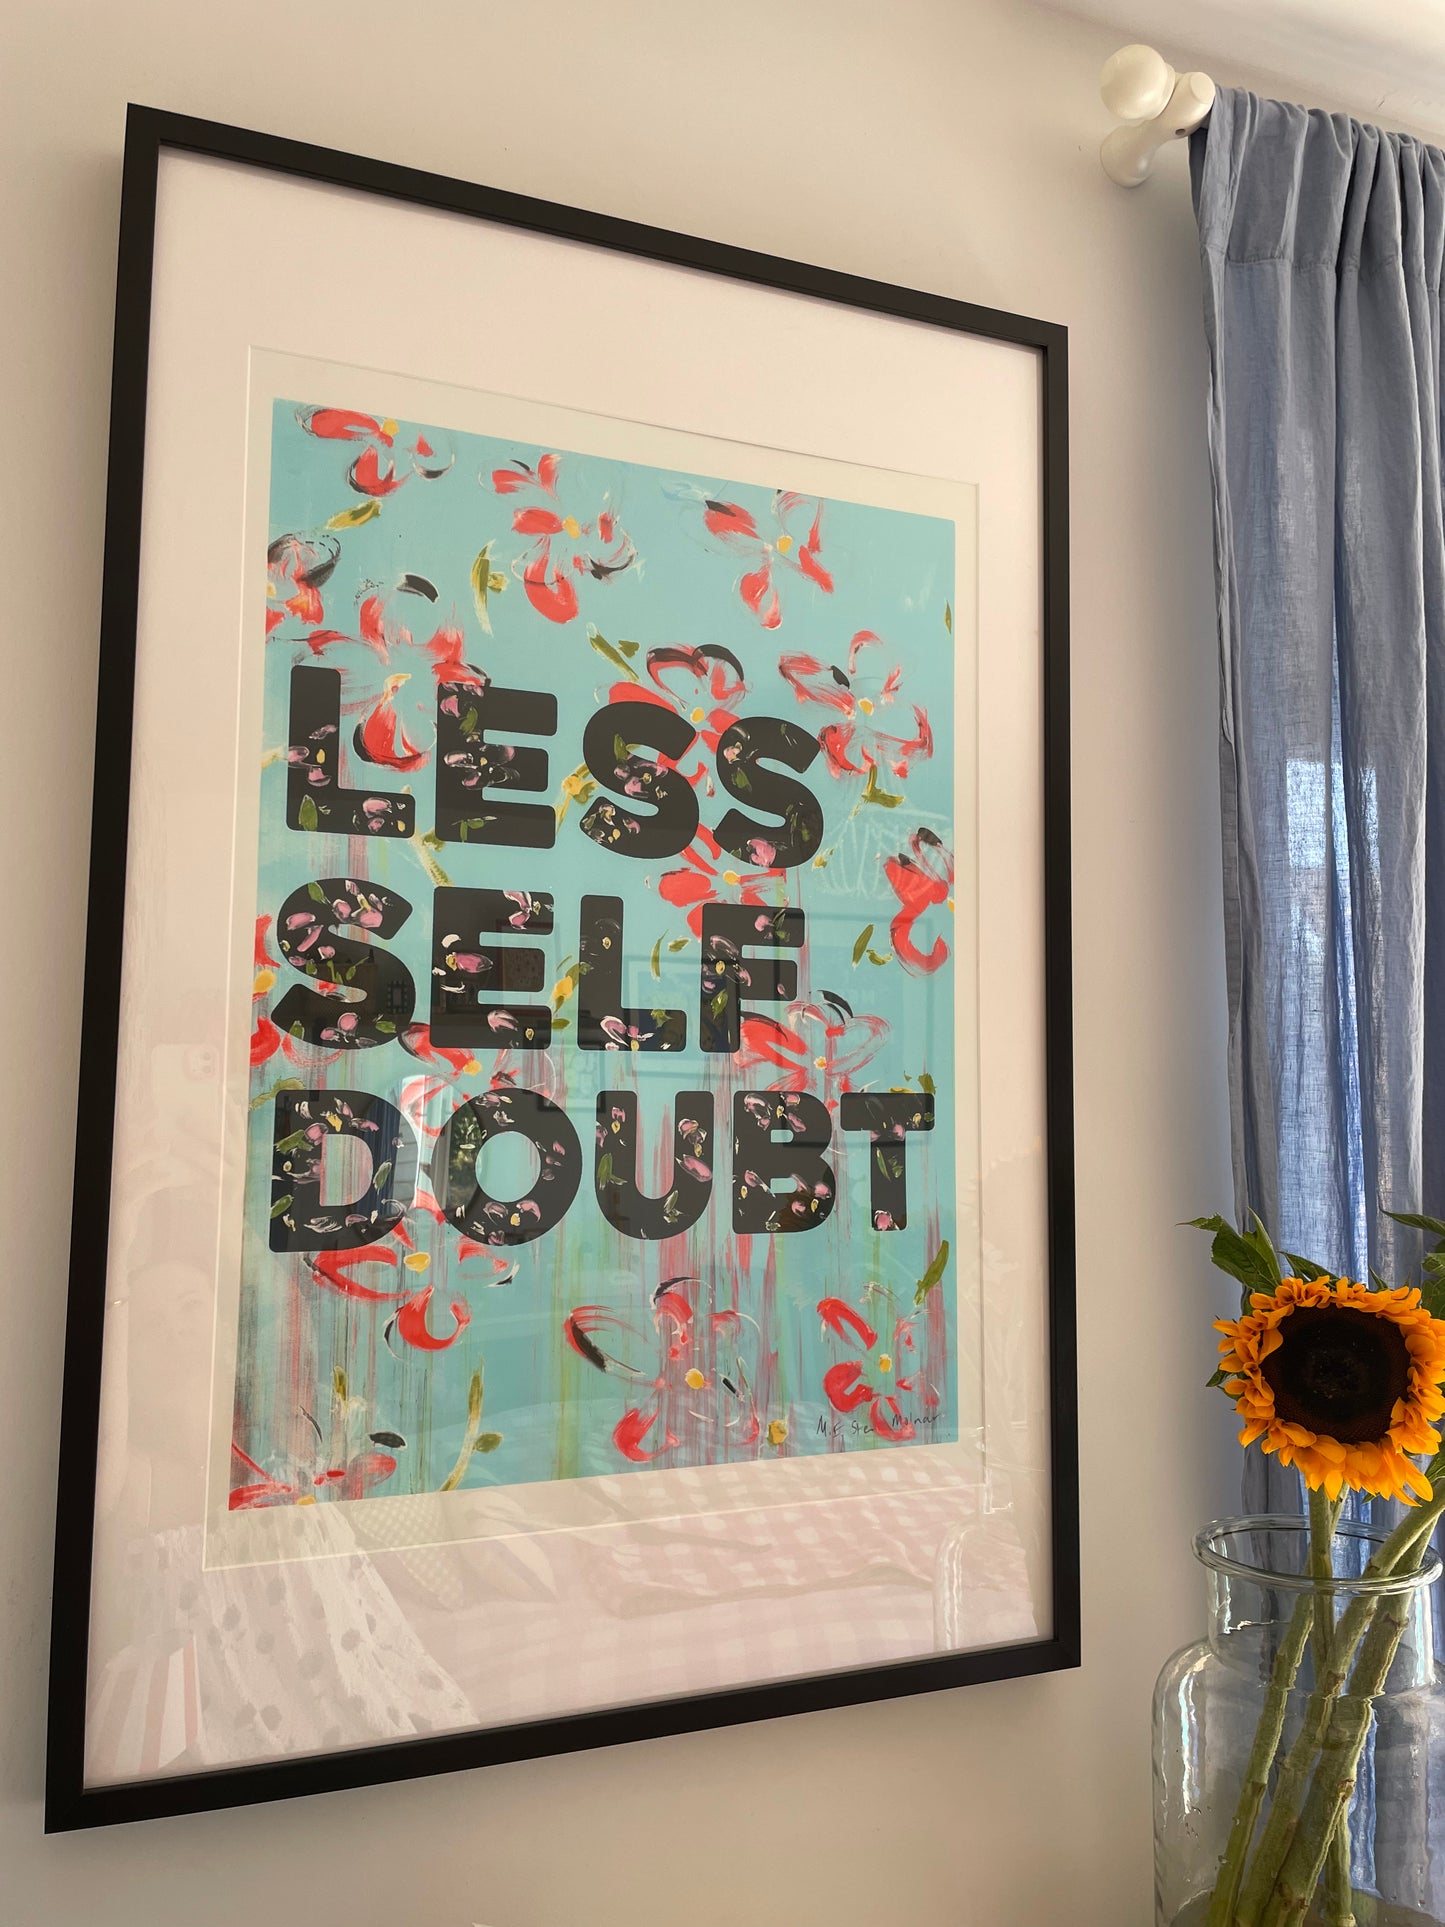 Less Self Doubt Floral Poster